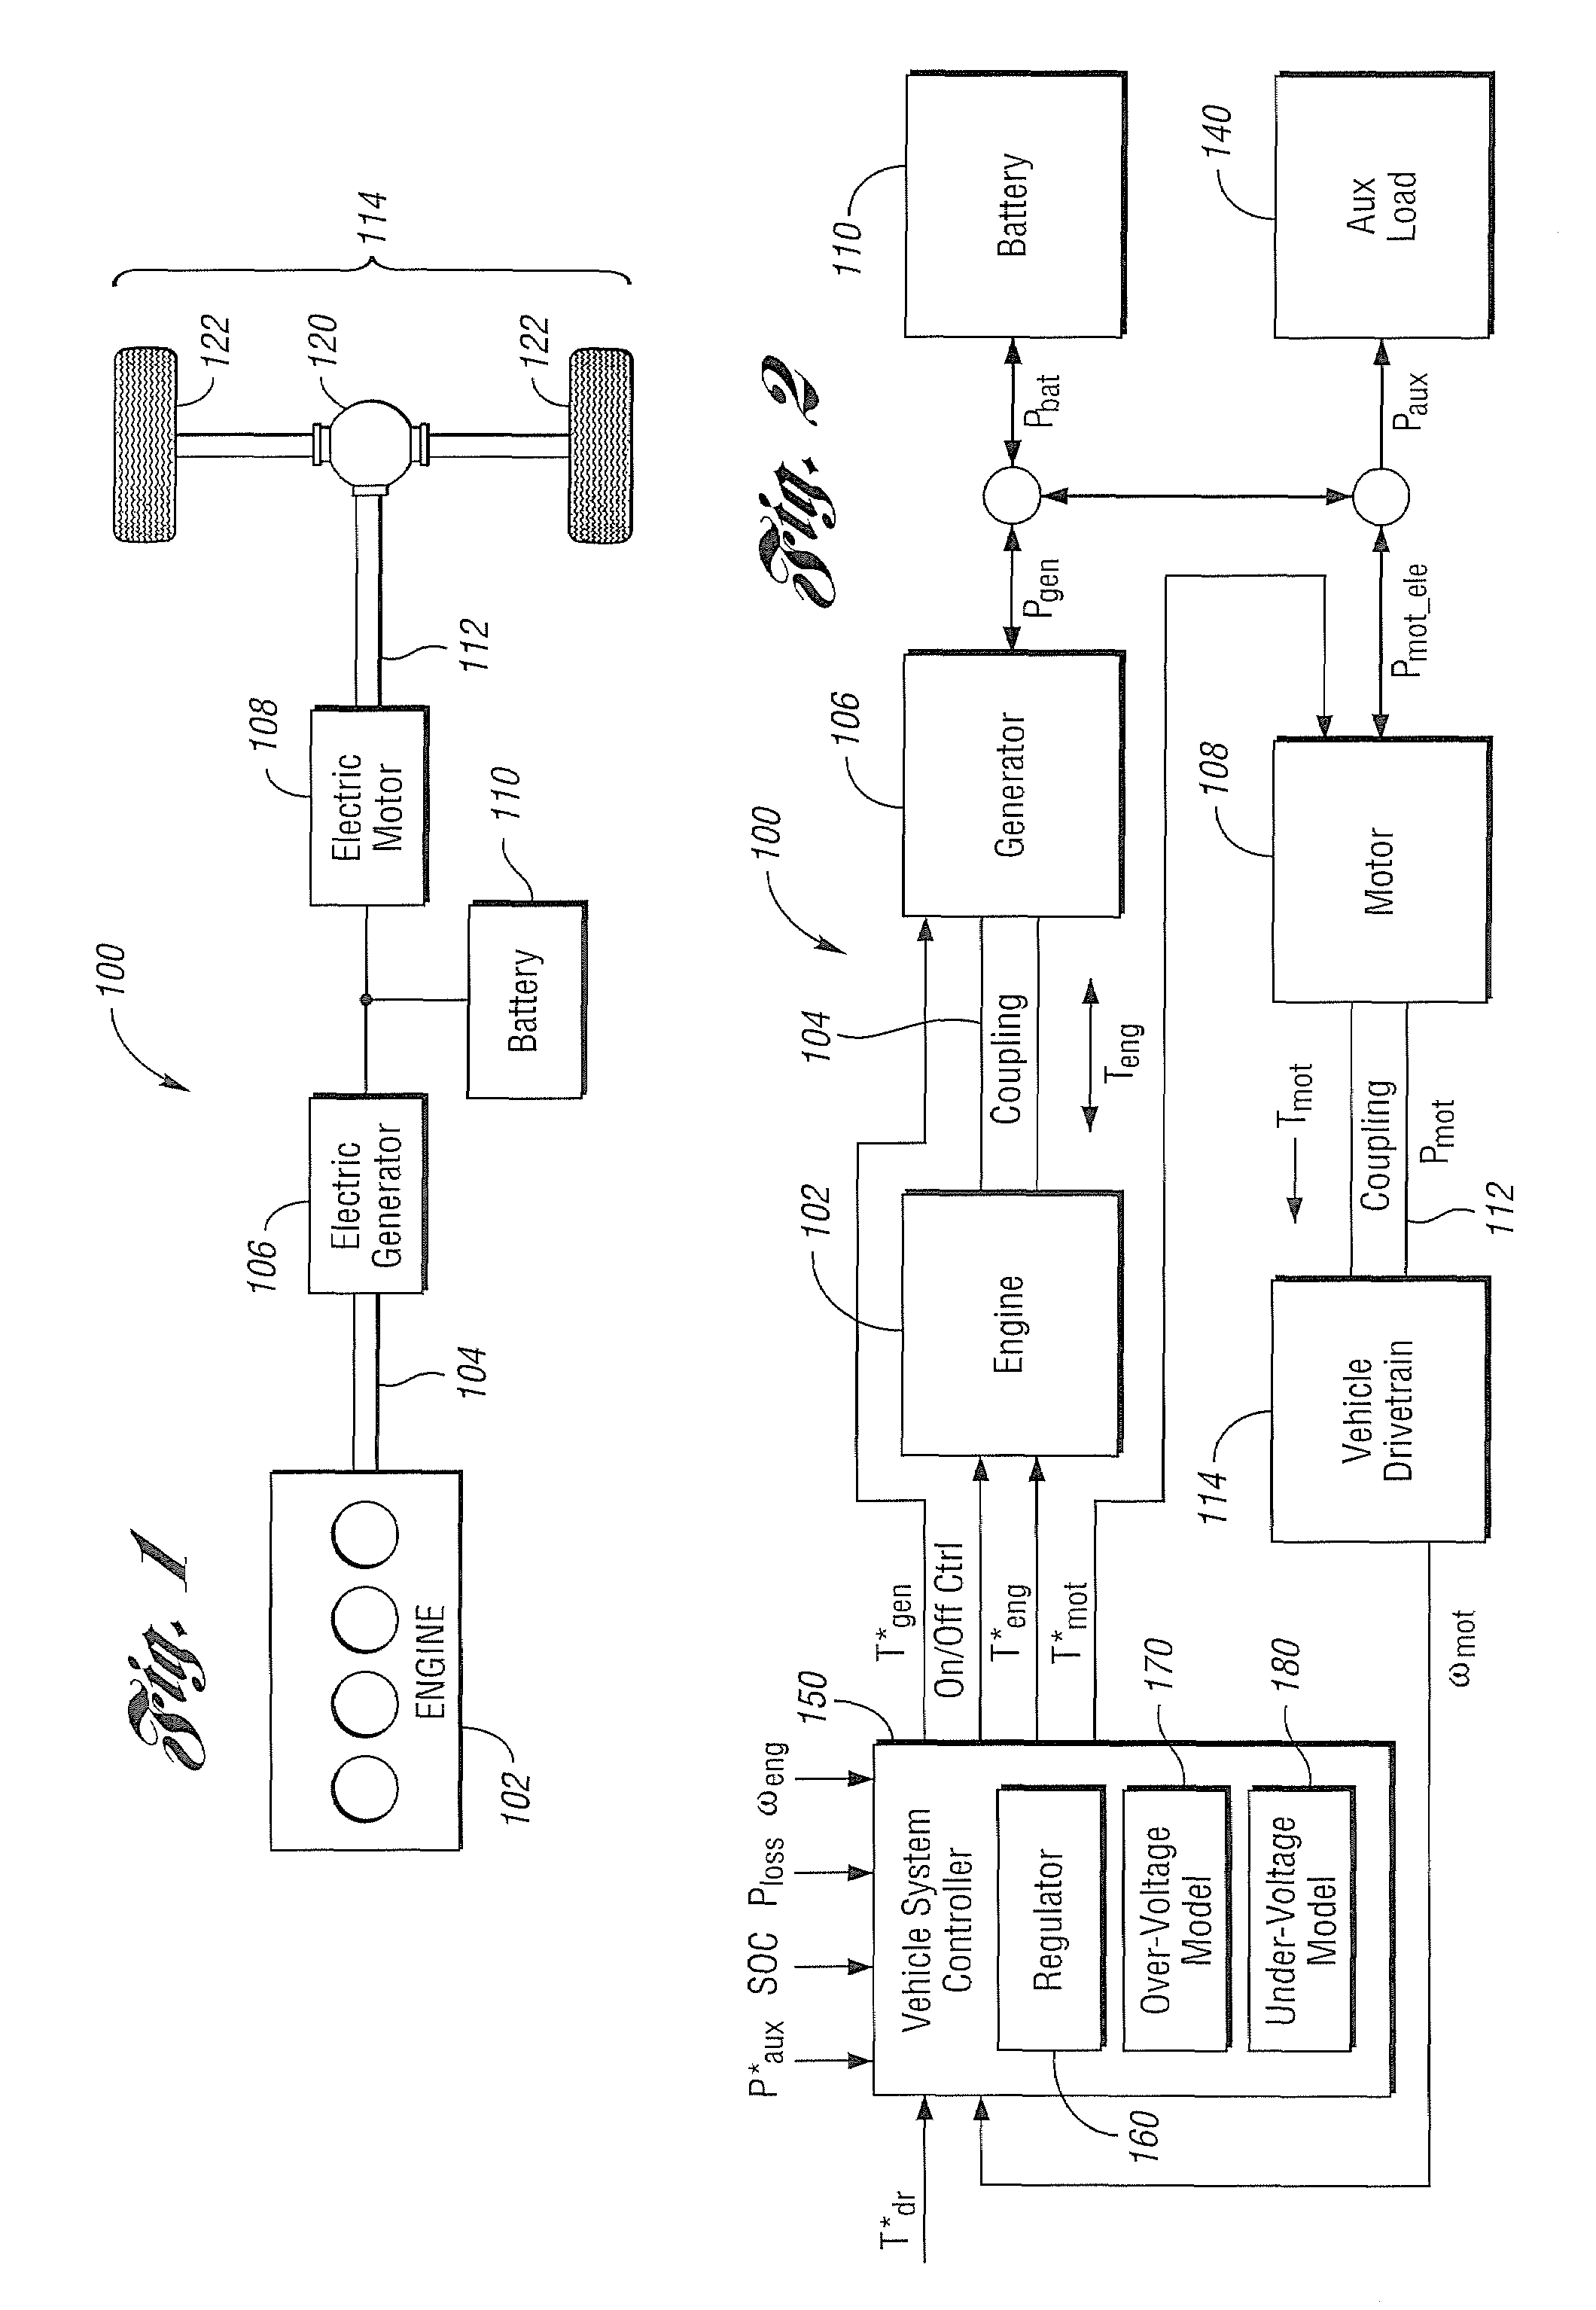 System and method for battery protection strategy for hybrid electric vehicles